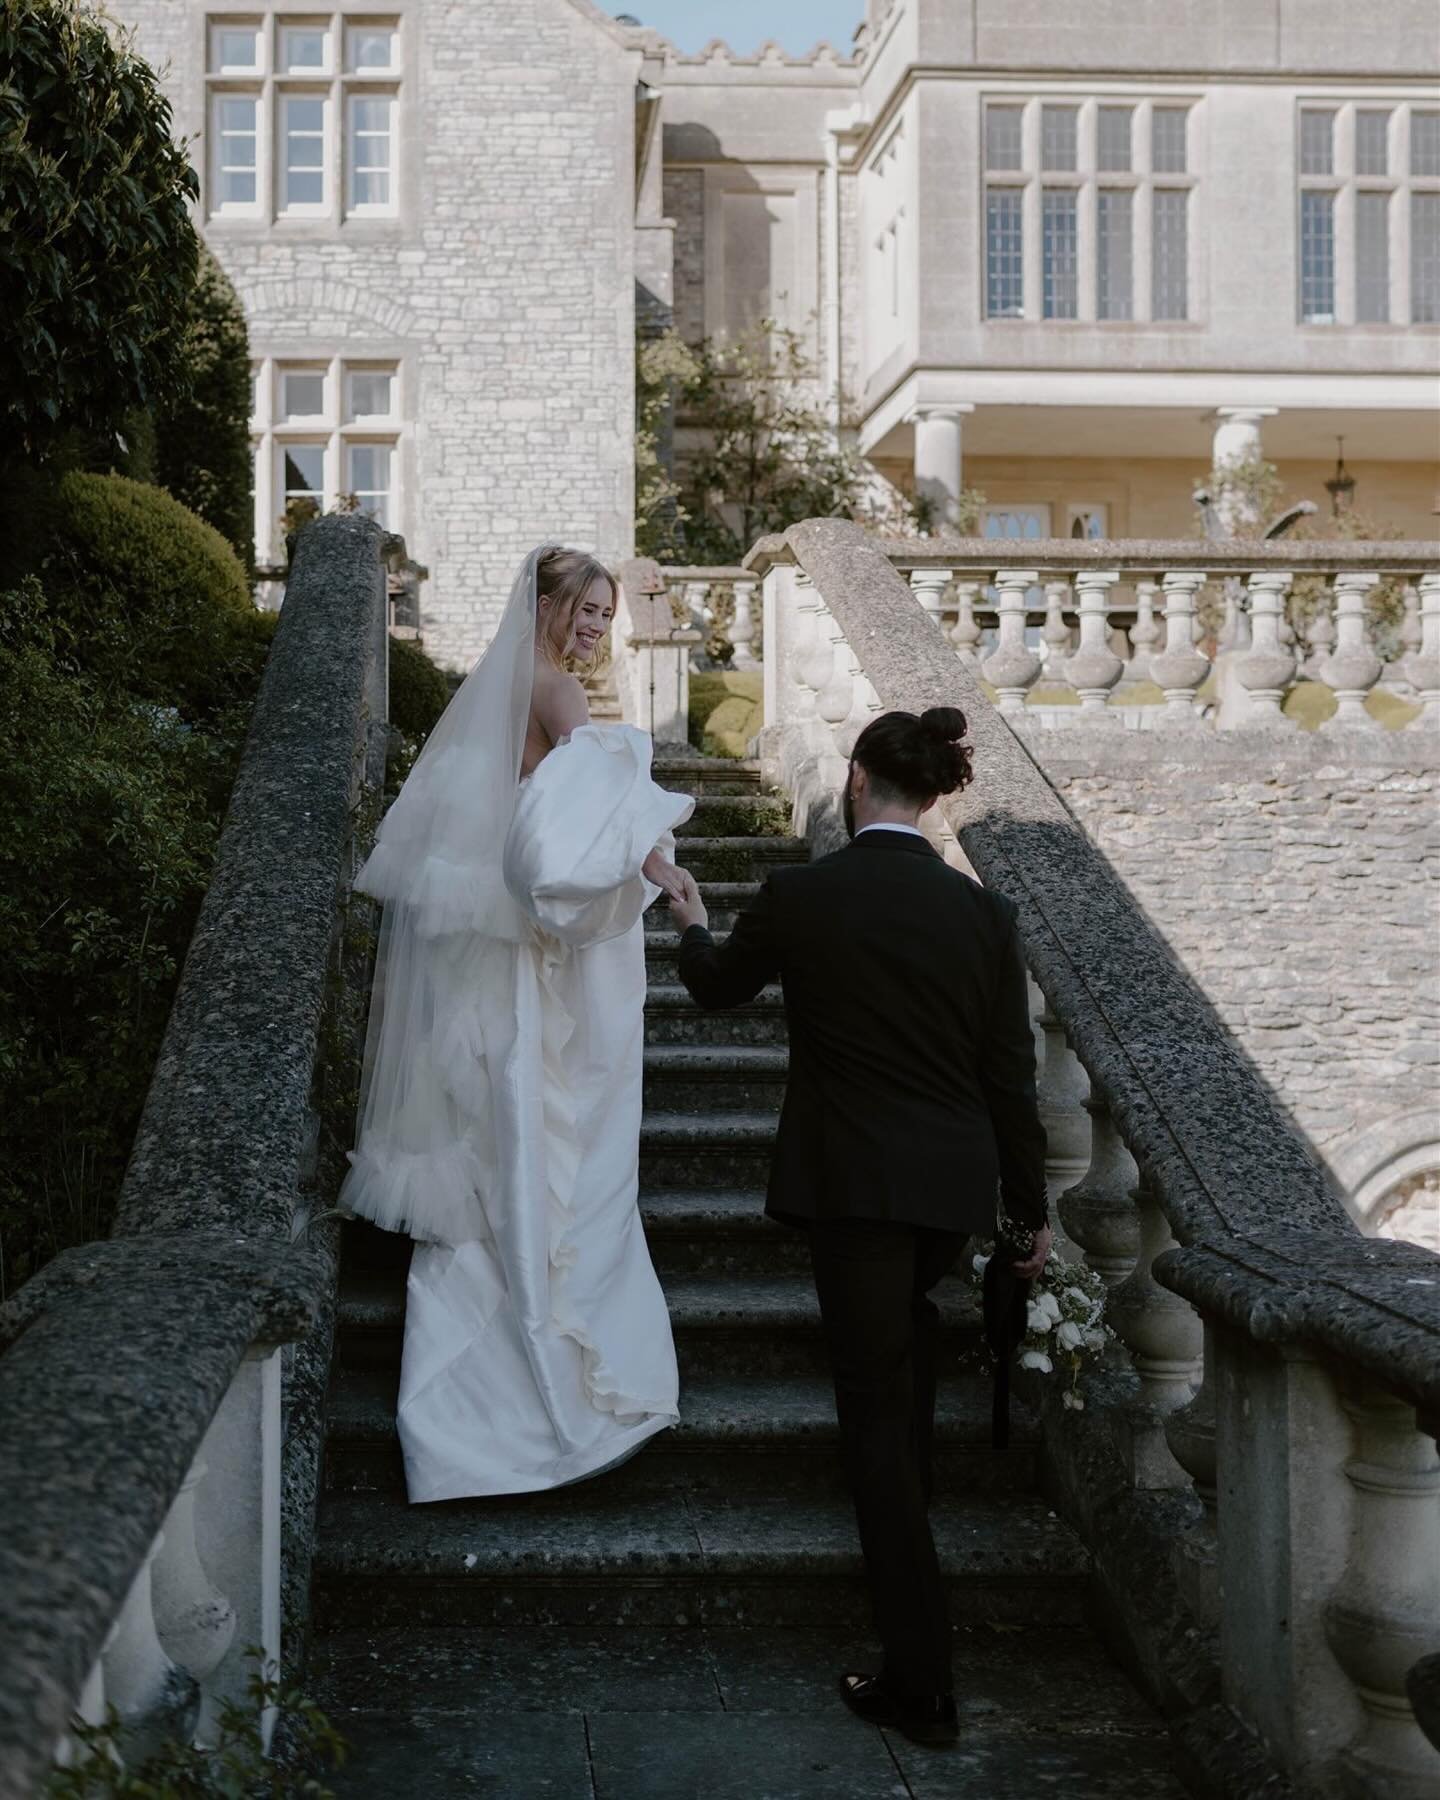 Grace and Sam are surrounded by the beautiful Euridge Manor 🤍

Grace is wearing the most beautiful gown with oversized puff sleeves. An absolutely iconic look!

Euridge Manor is located in the Cotswolds, it provides breathtaking landscapes and timel